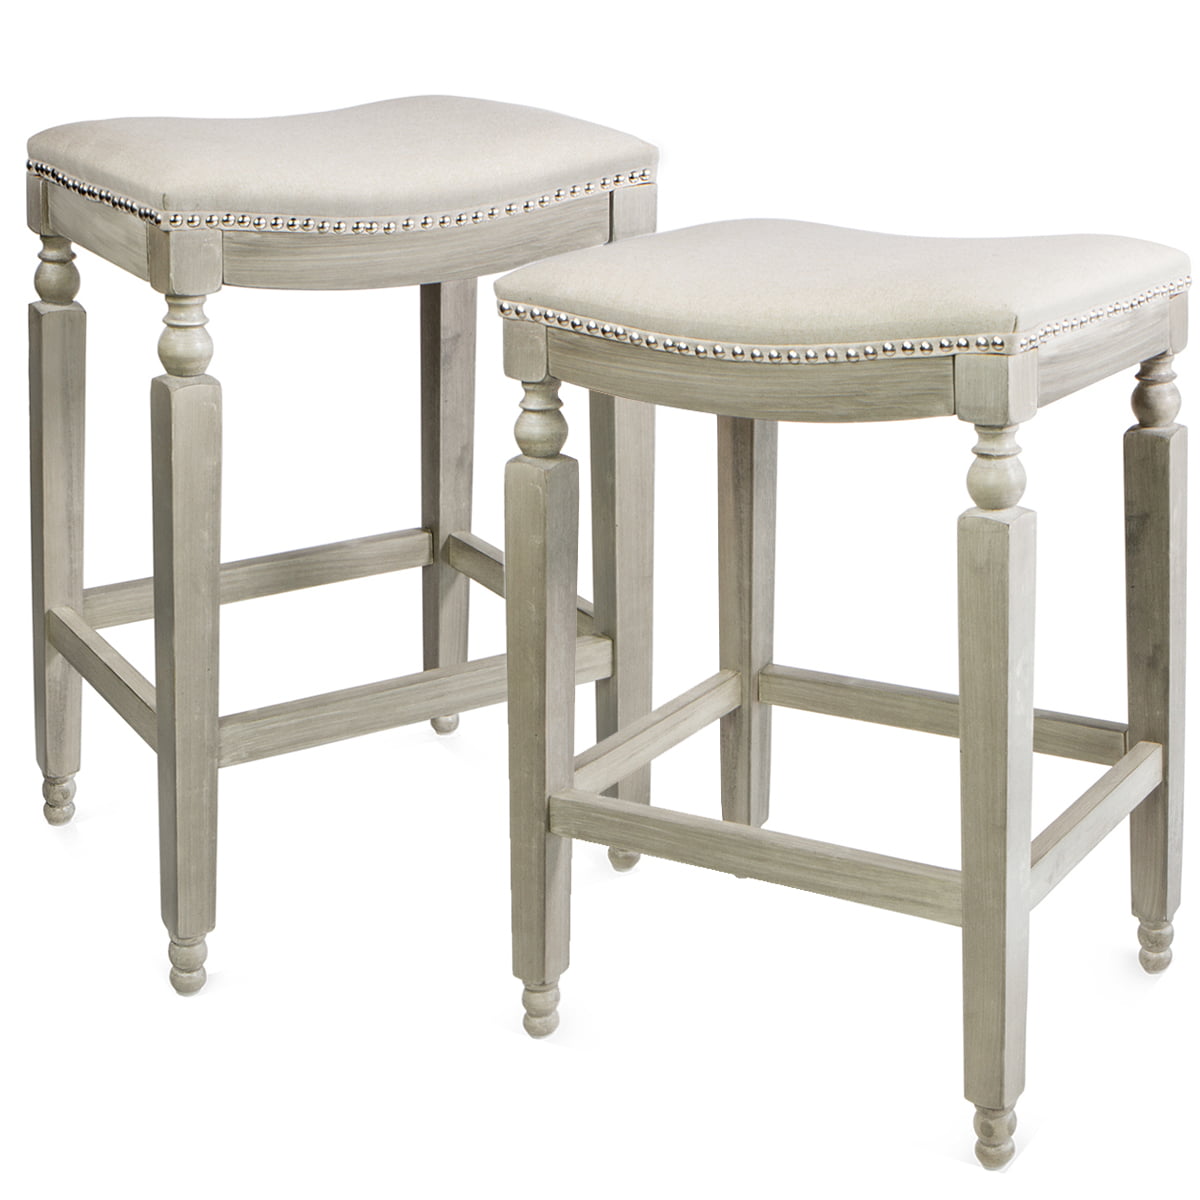 Barton Isabel Padded Counter Saddle, Padded Bar Stools With Arms